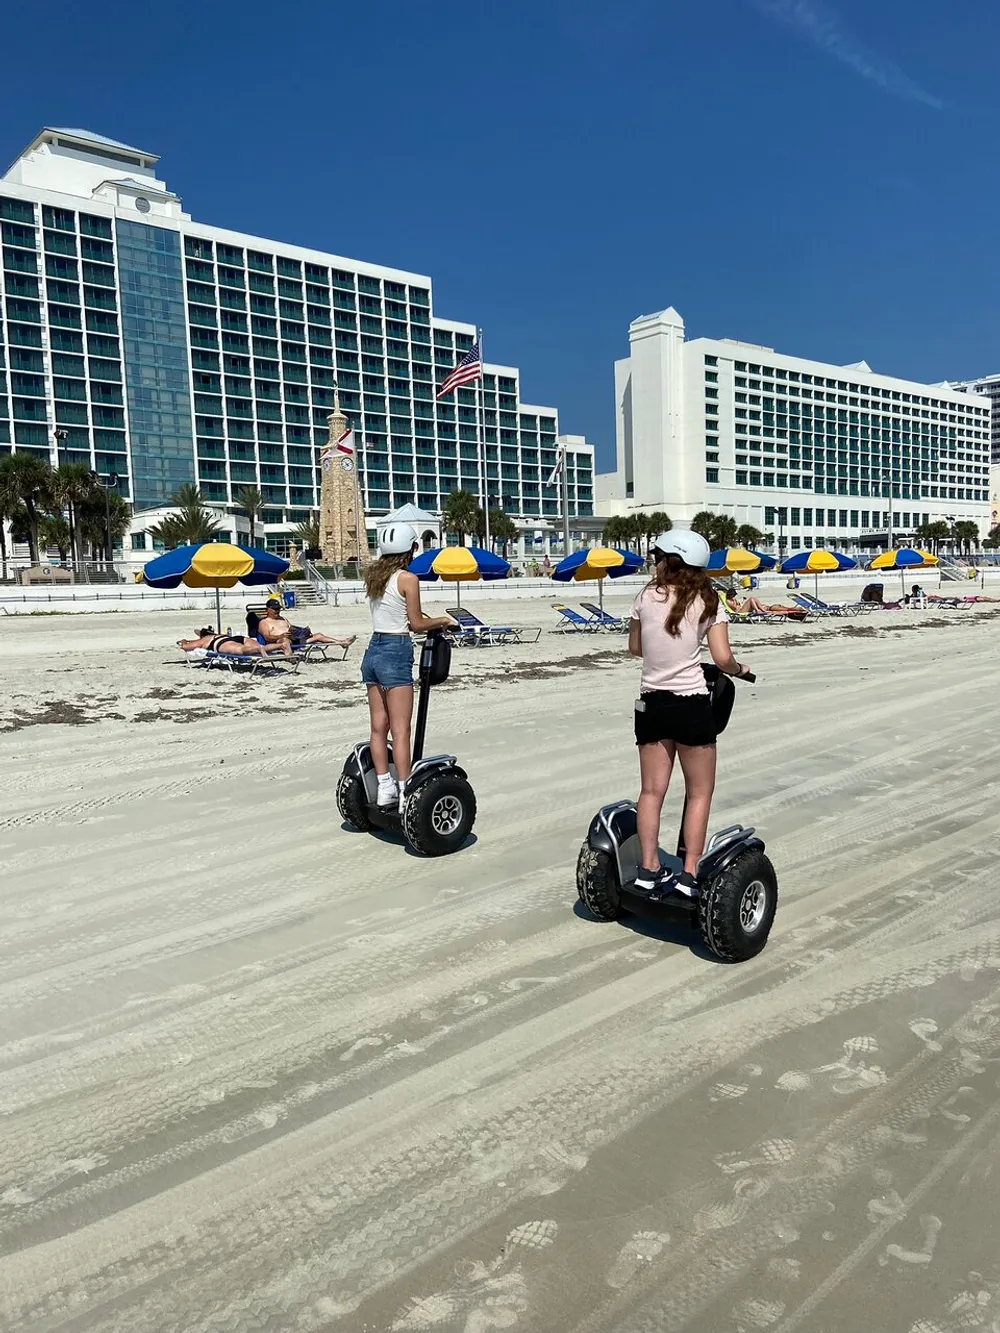 Two people wearing helmets are riding Segways on a sunny beach with umbrellas sun loungers and a large hotel complex in the background